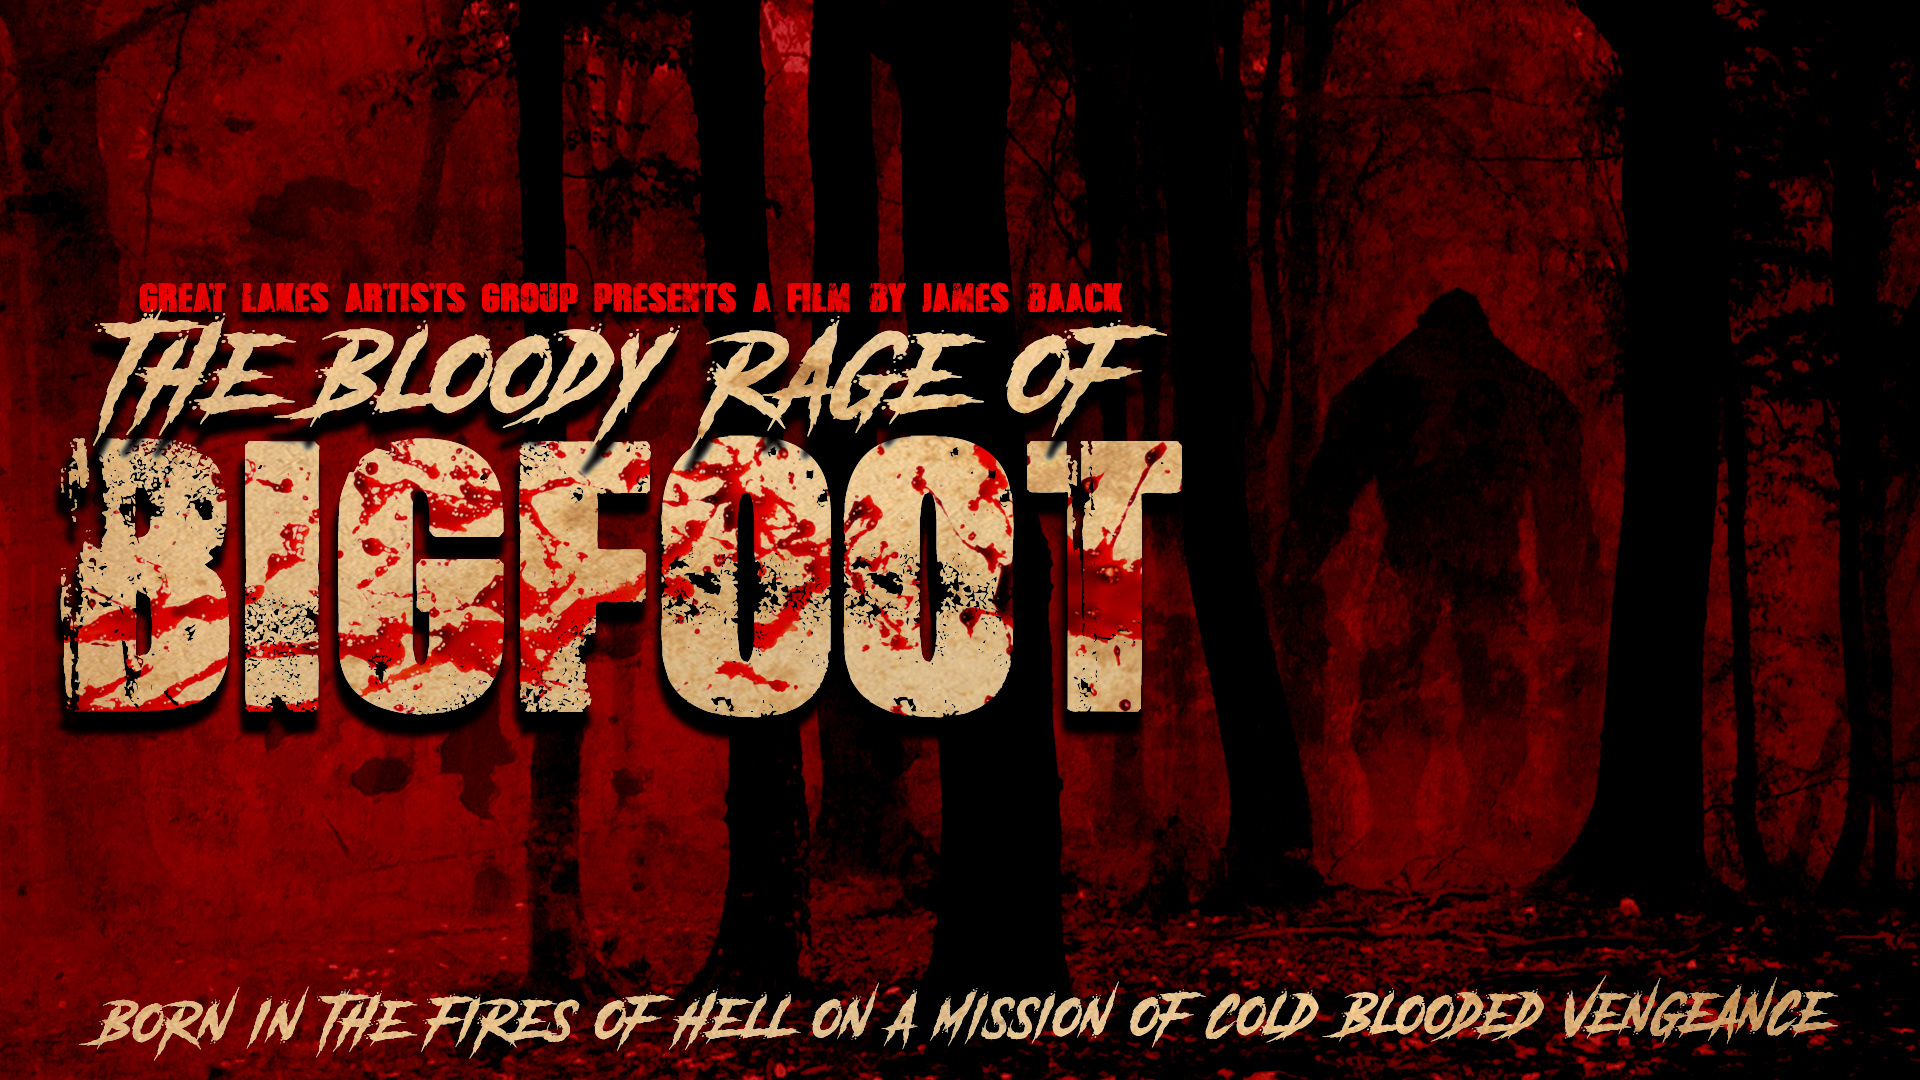 The Bloody Rage Of Bigfoot